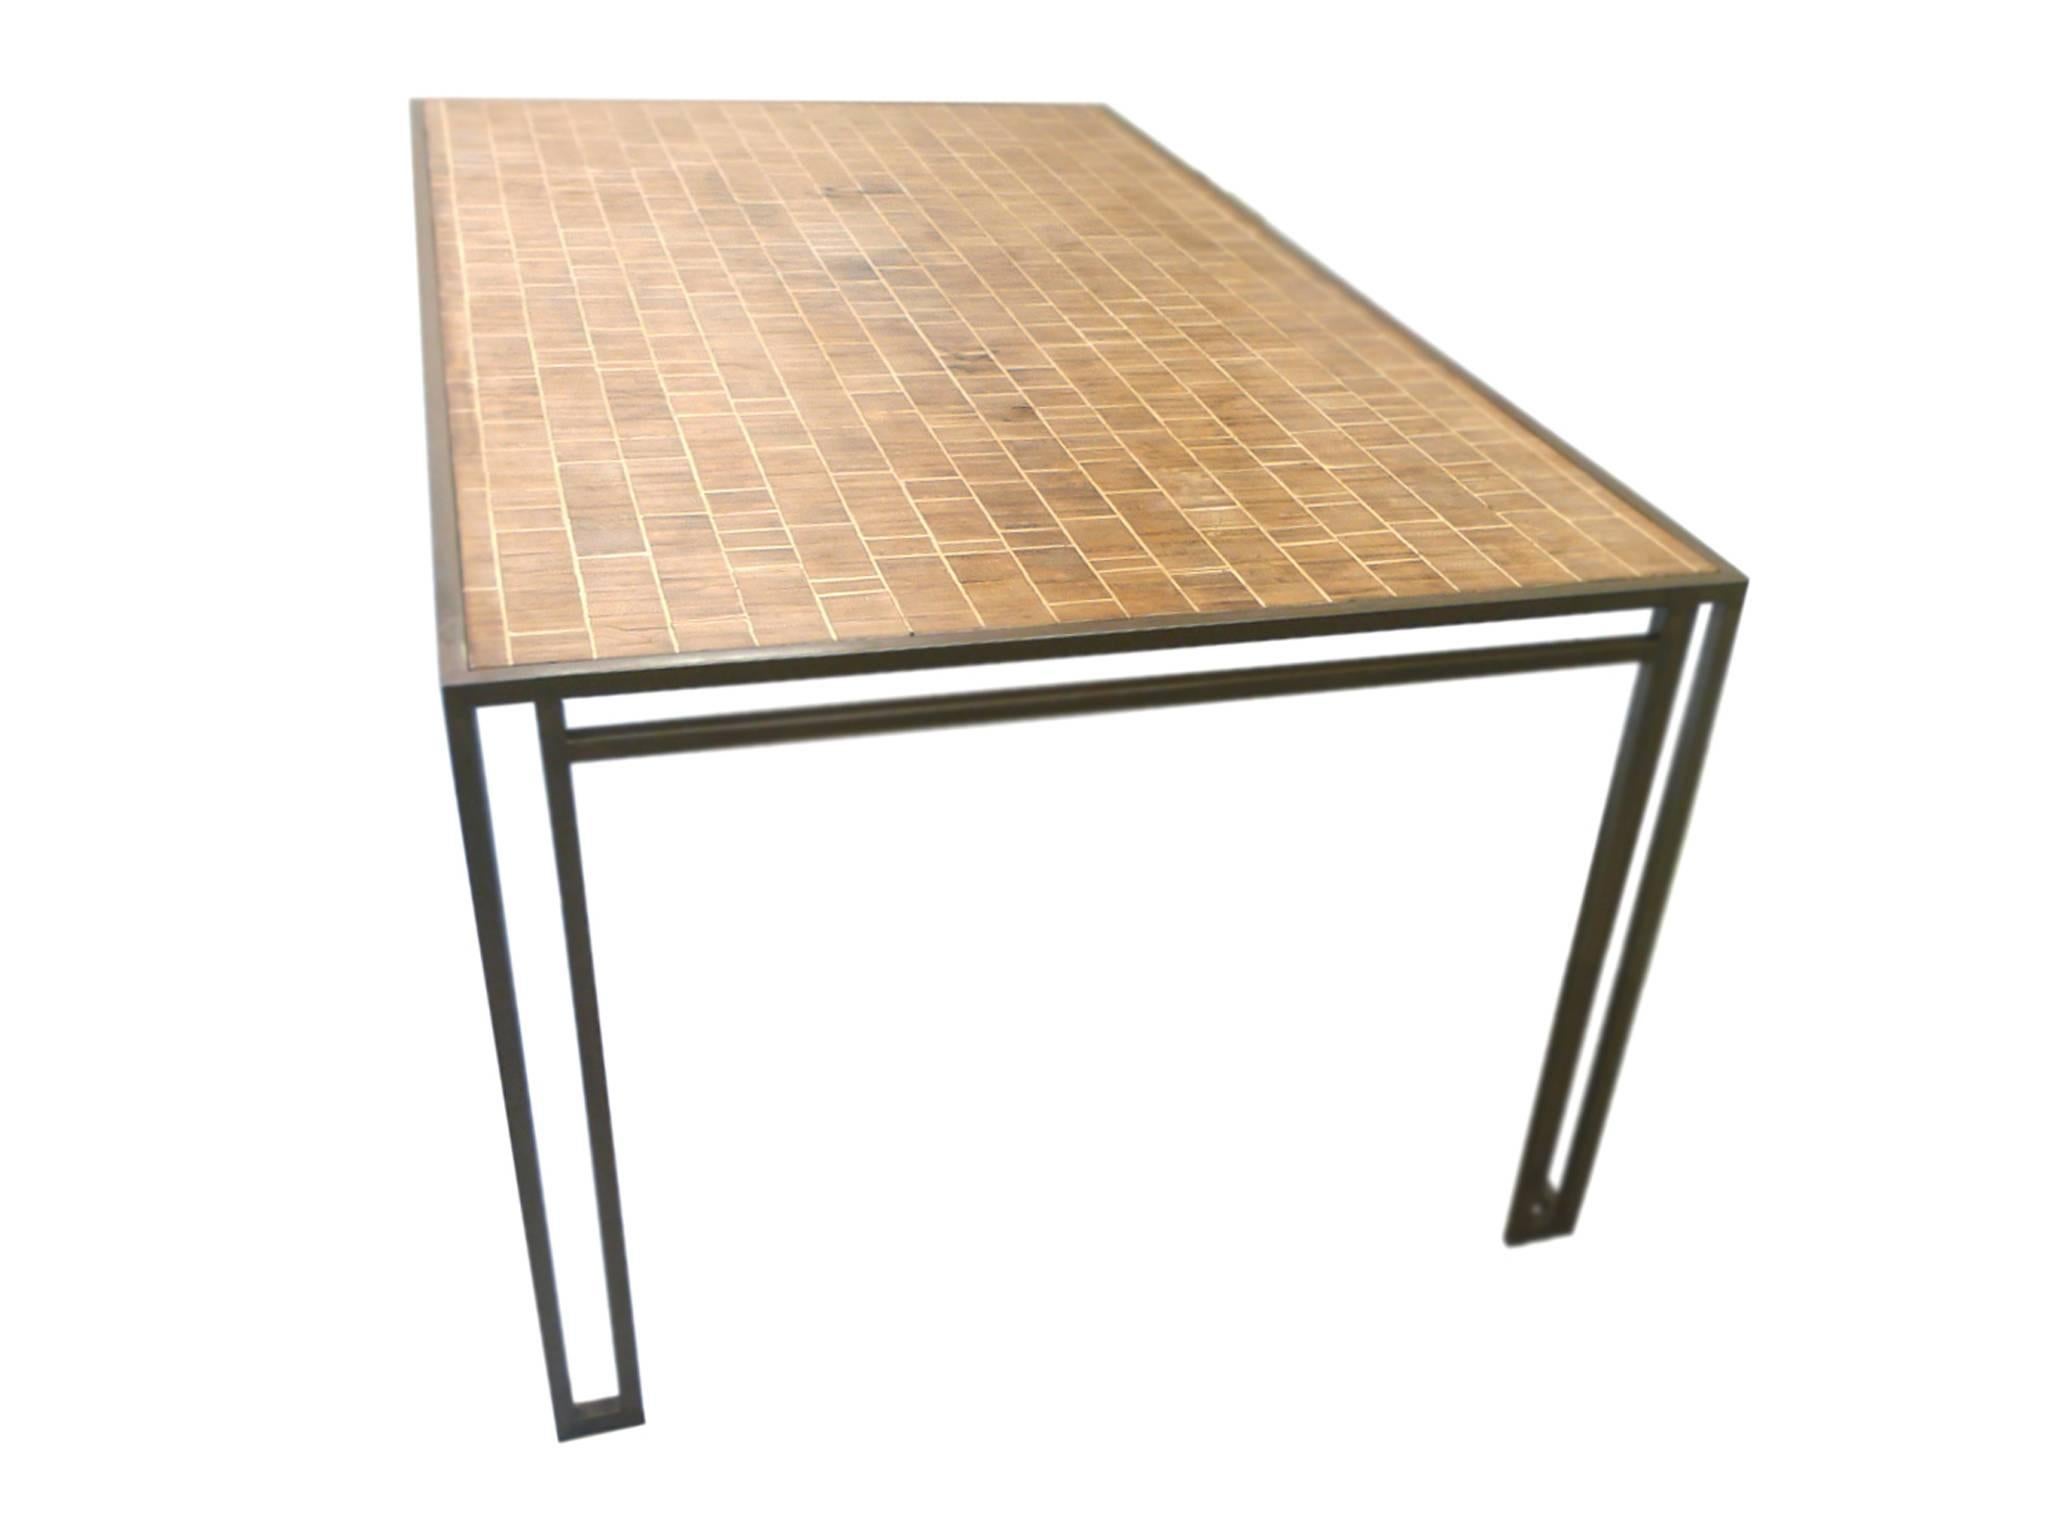 This 1970s dining table was designed by American interior decorator Billy Baldwin. It is comprised of an iron base and wood inlay top. The design is simple and elegant: the base makes use of slick Art Deco lines in its openwork structure, while the